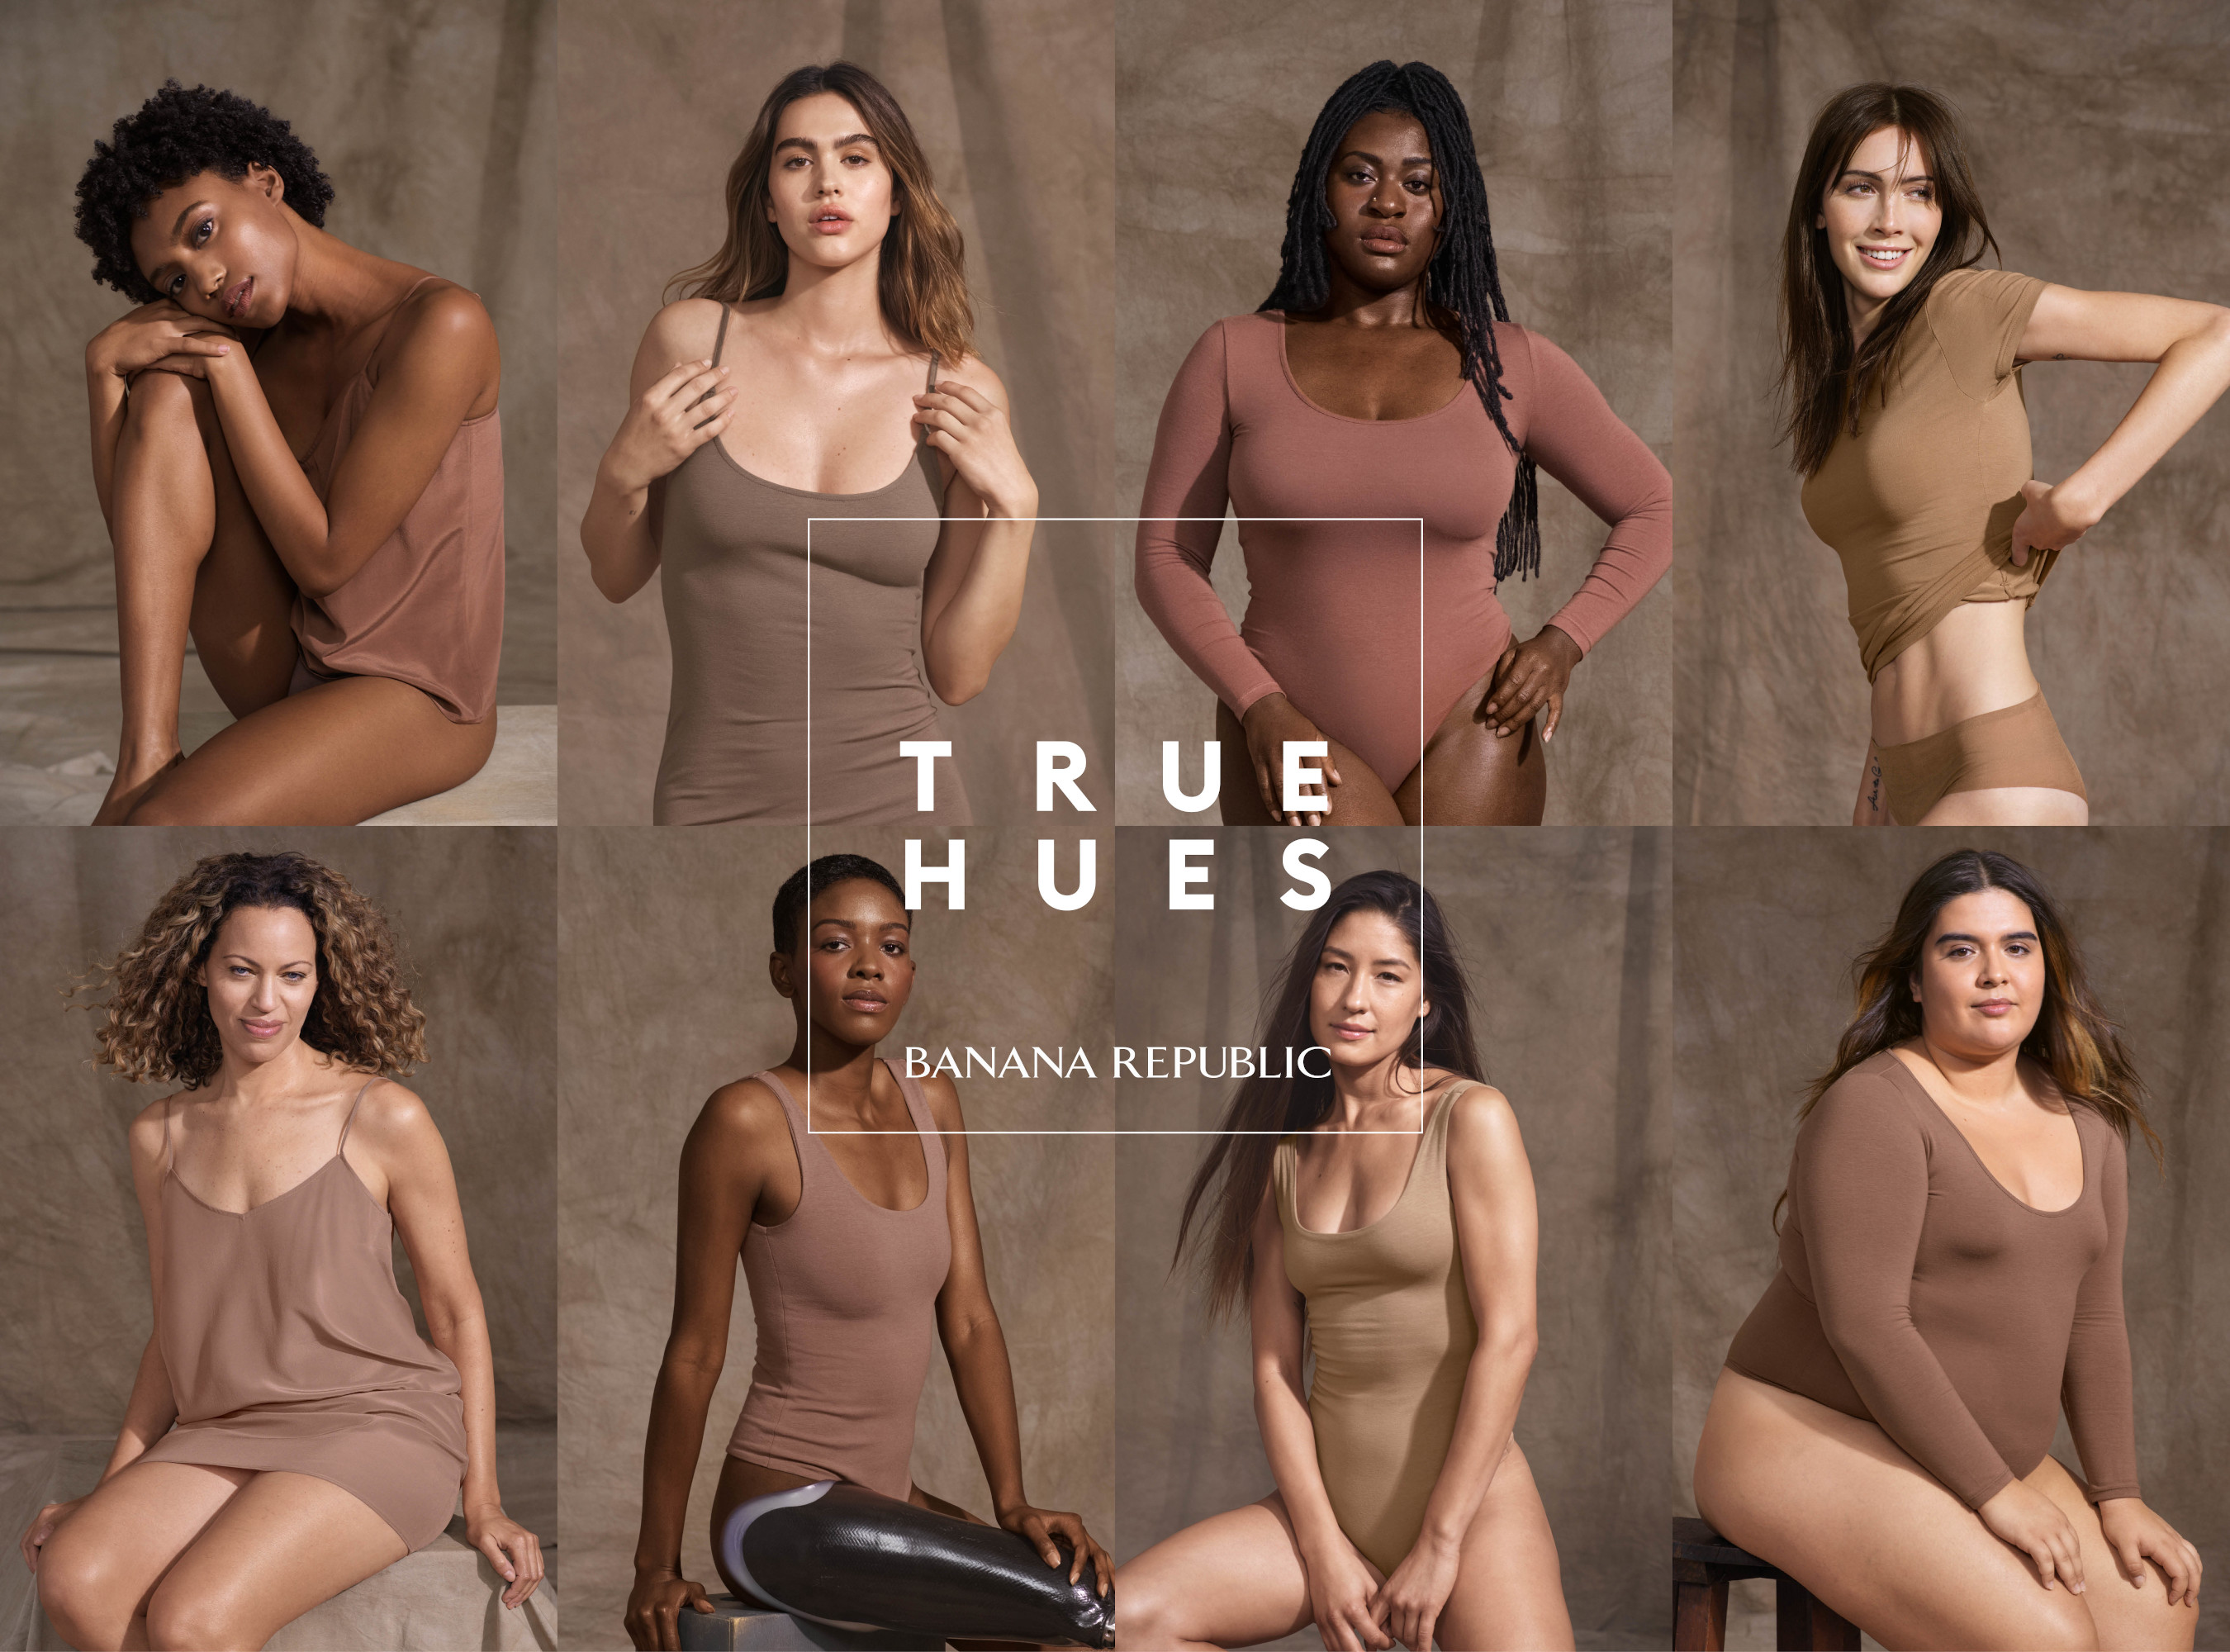 Beginning with Black History Month, Banana Republic’s True Hues campaign champions BIPOC talent in front of, and behind, the camera.